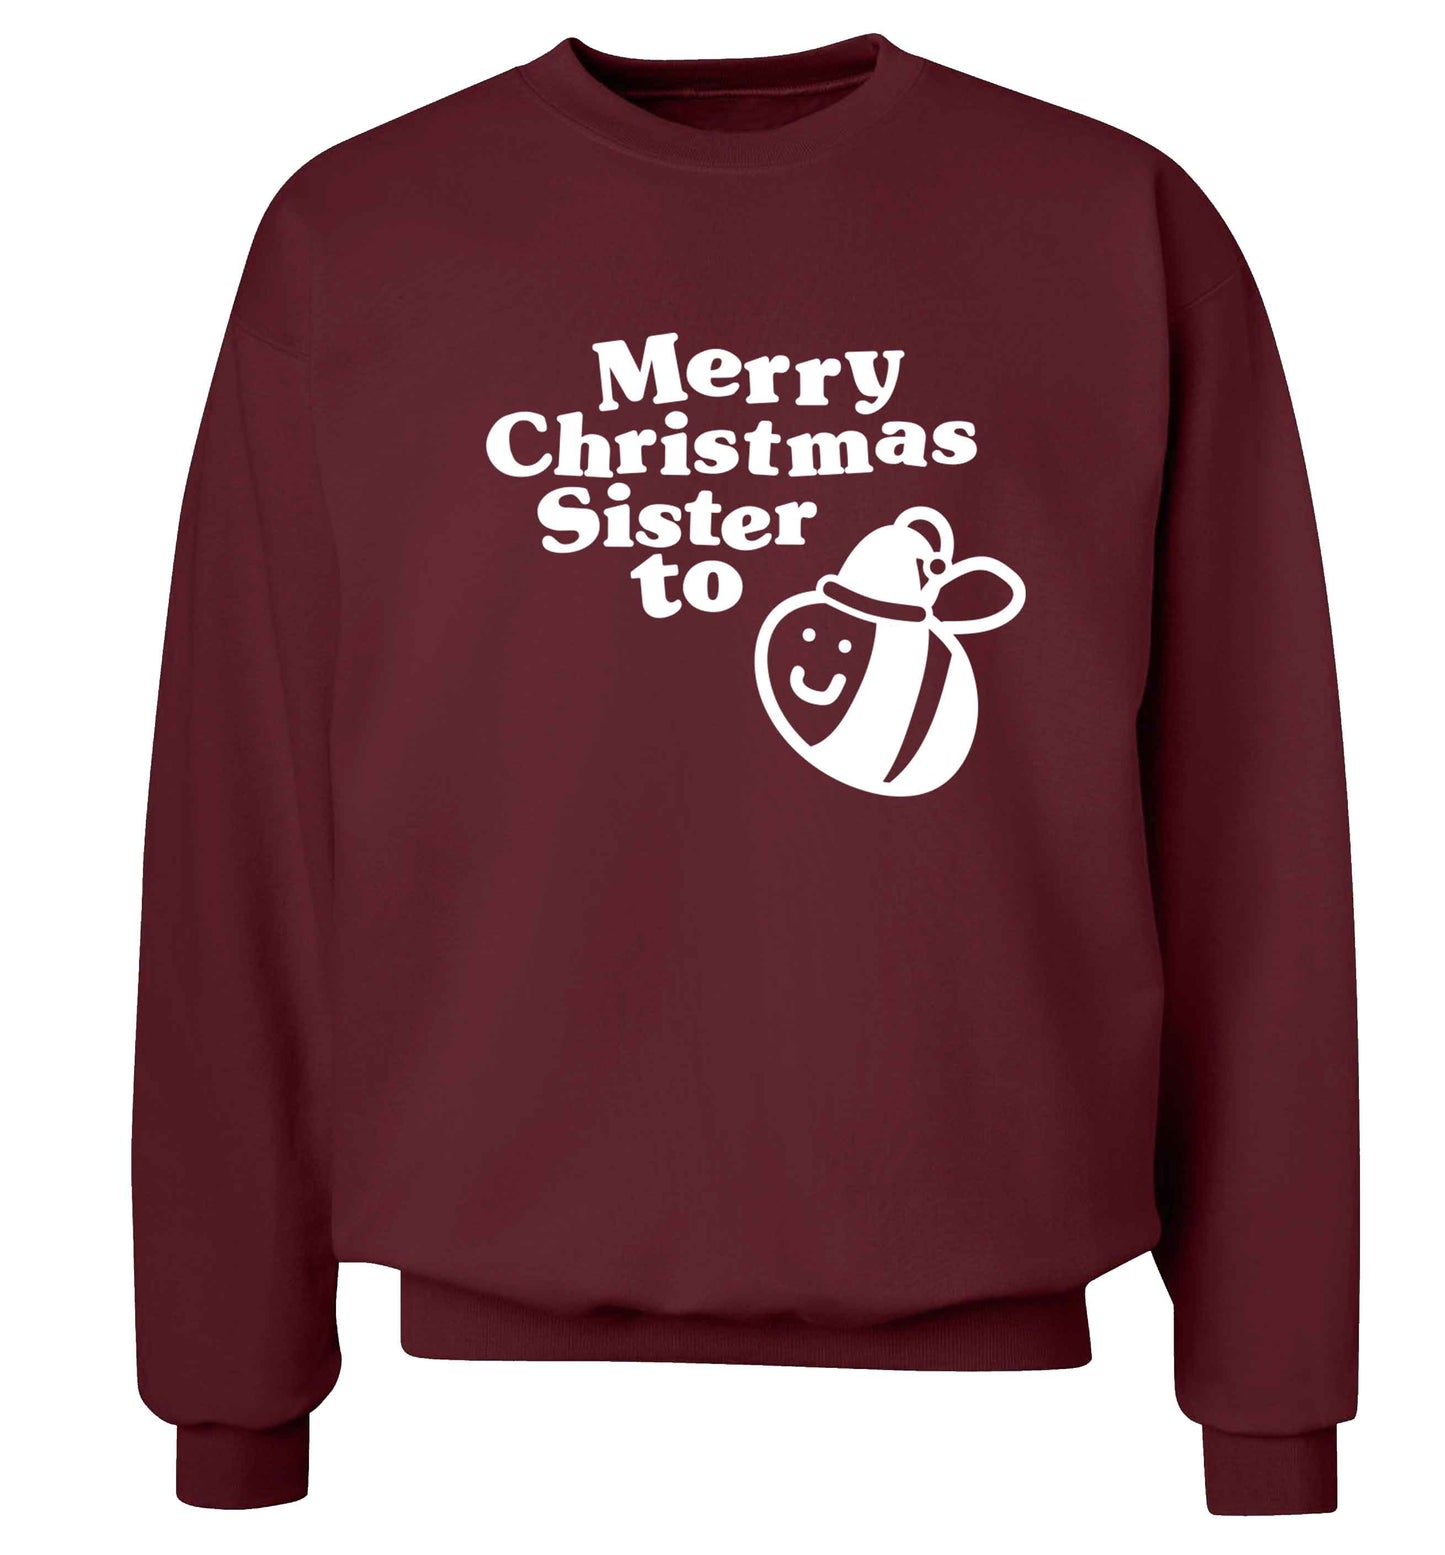 Merry Christmas sister to be Adult's unisex maroon Sweater 2XL